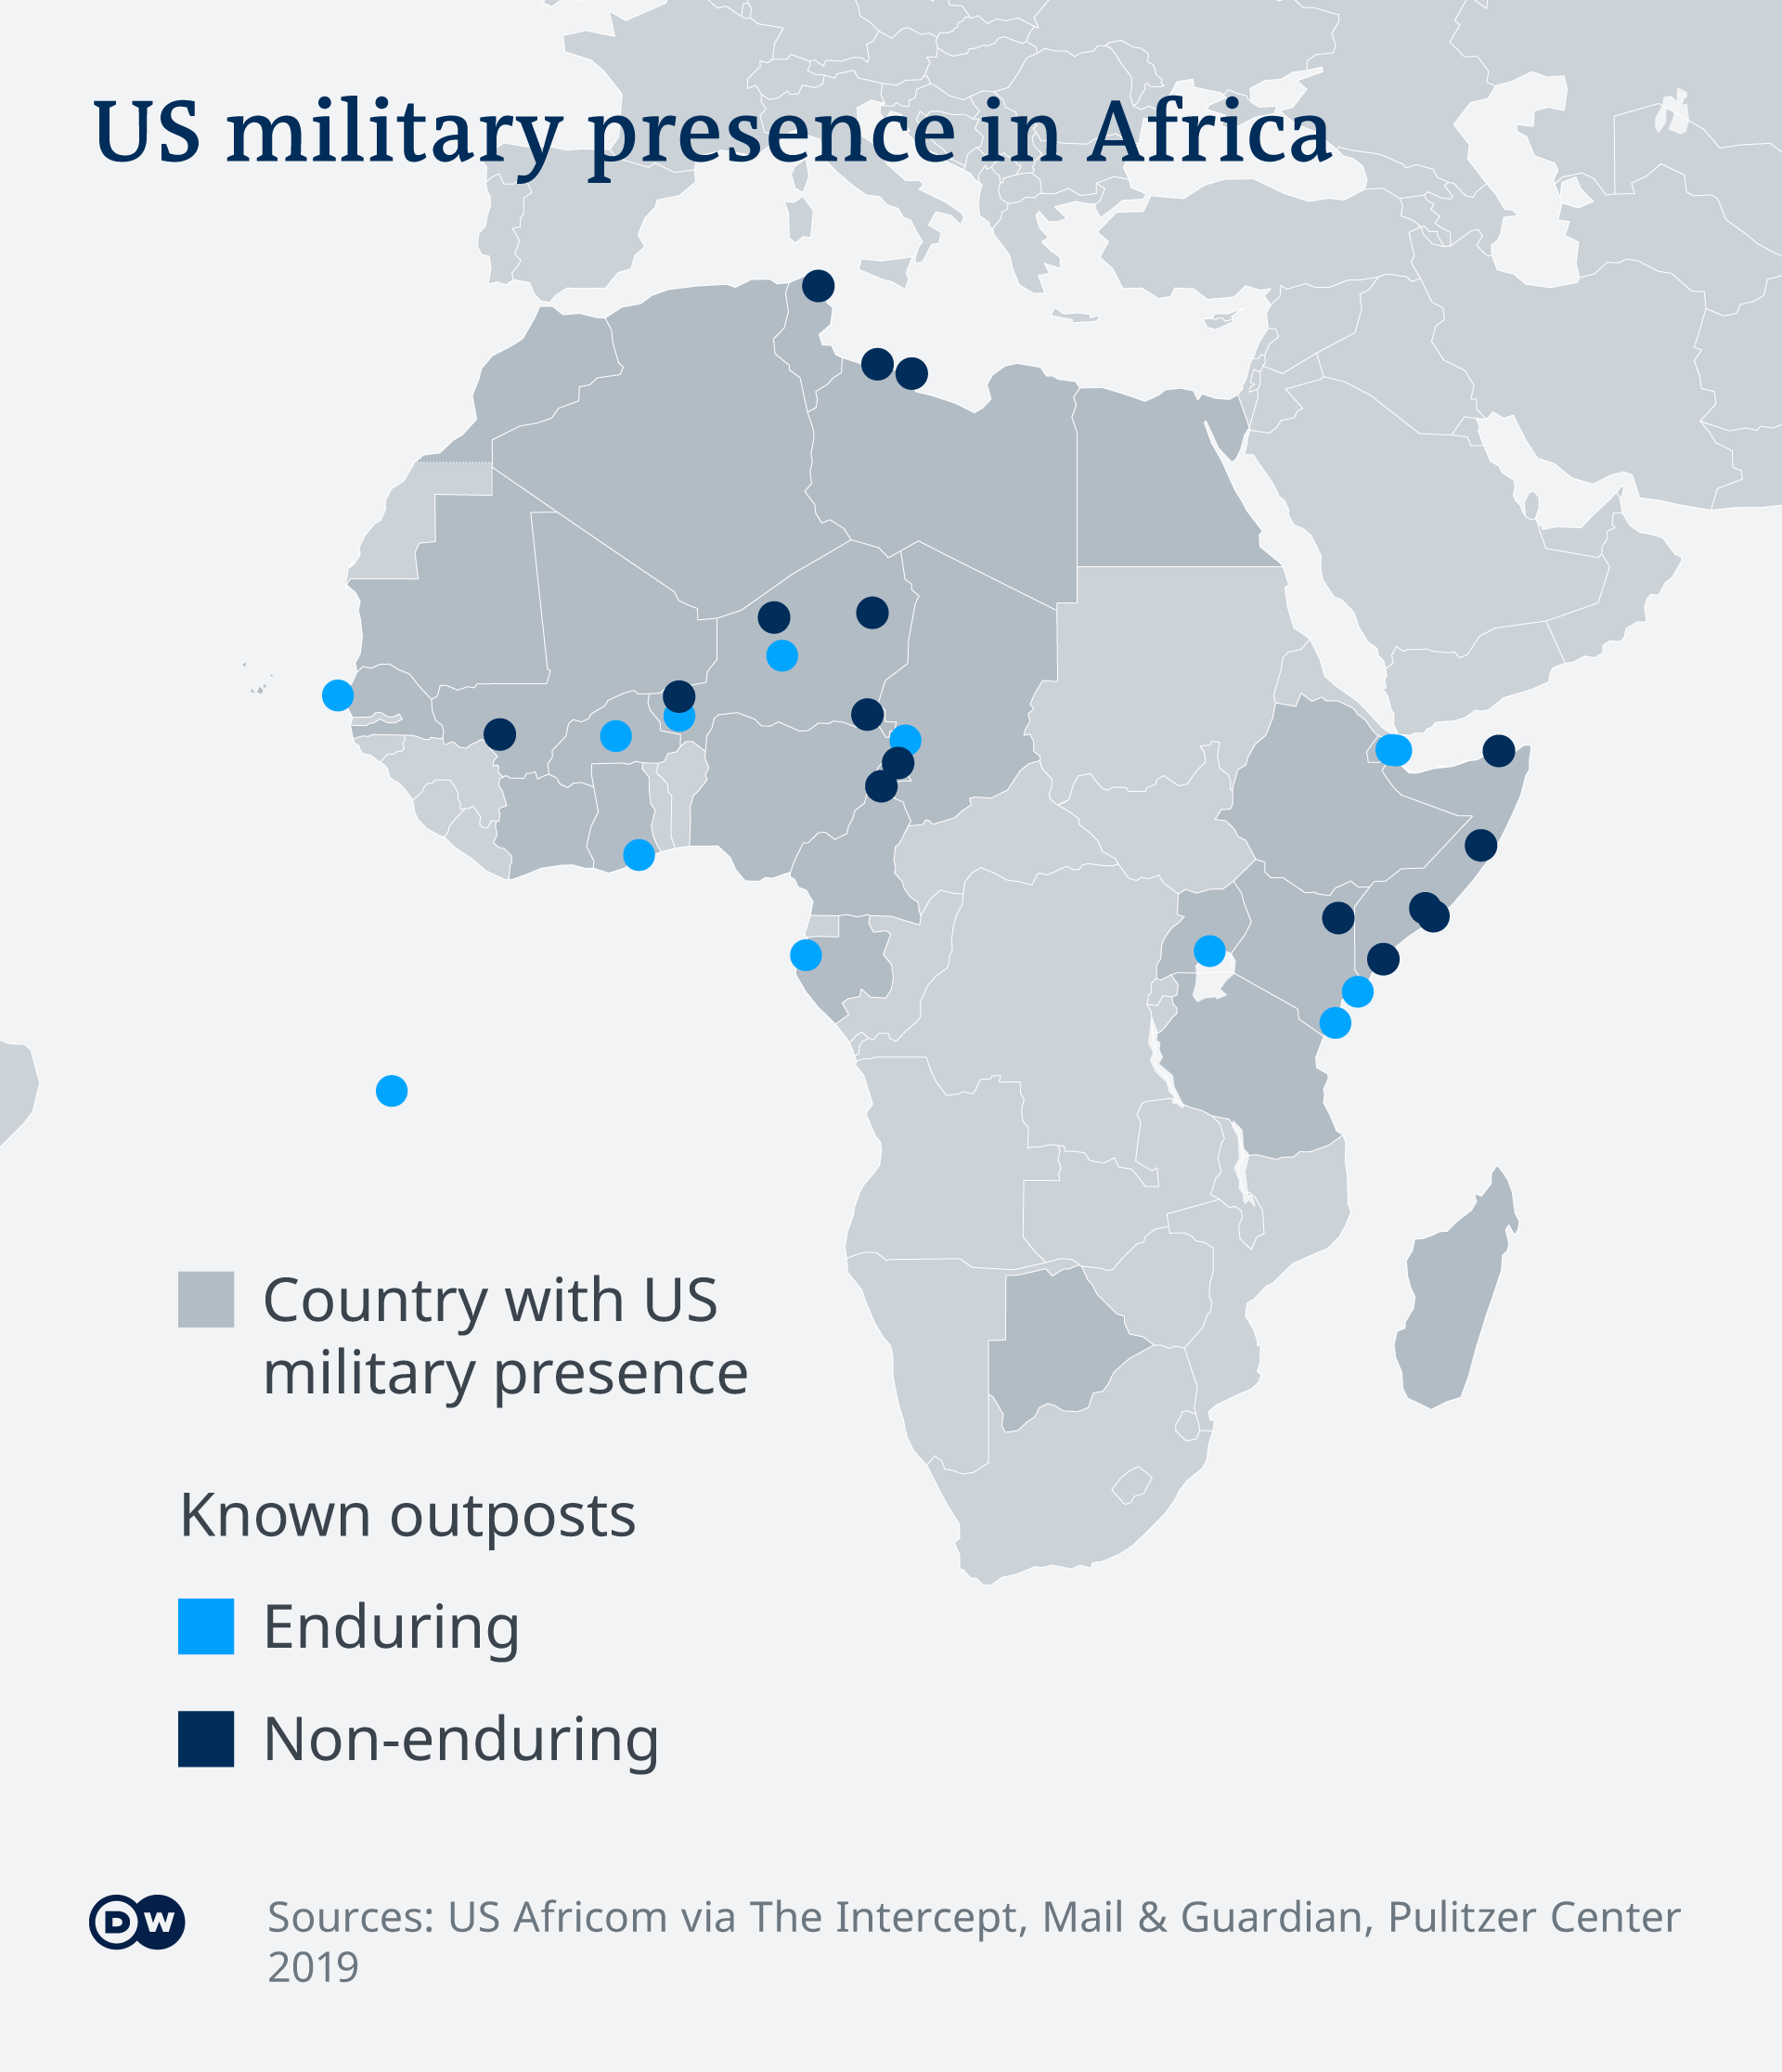 An infographic showing US military presence in Africa